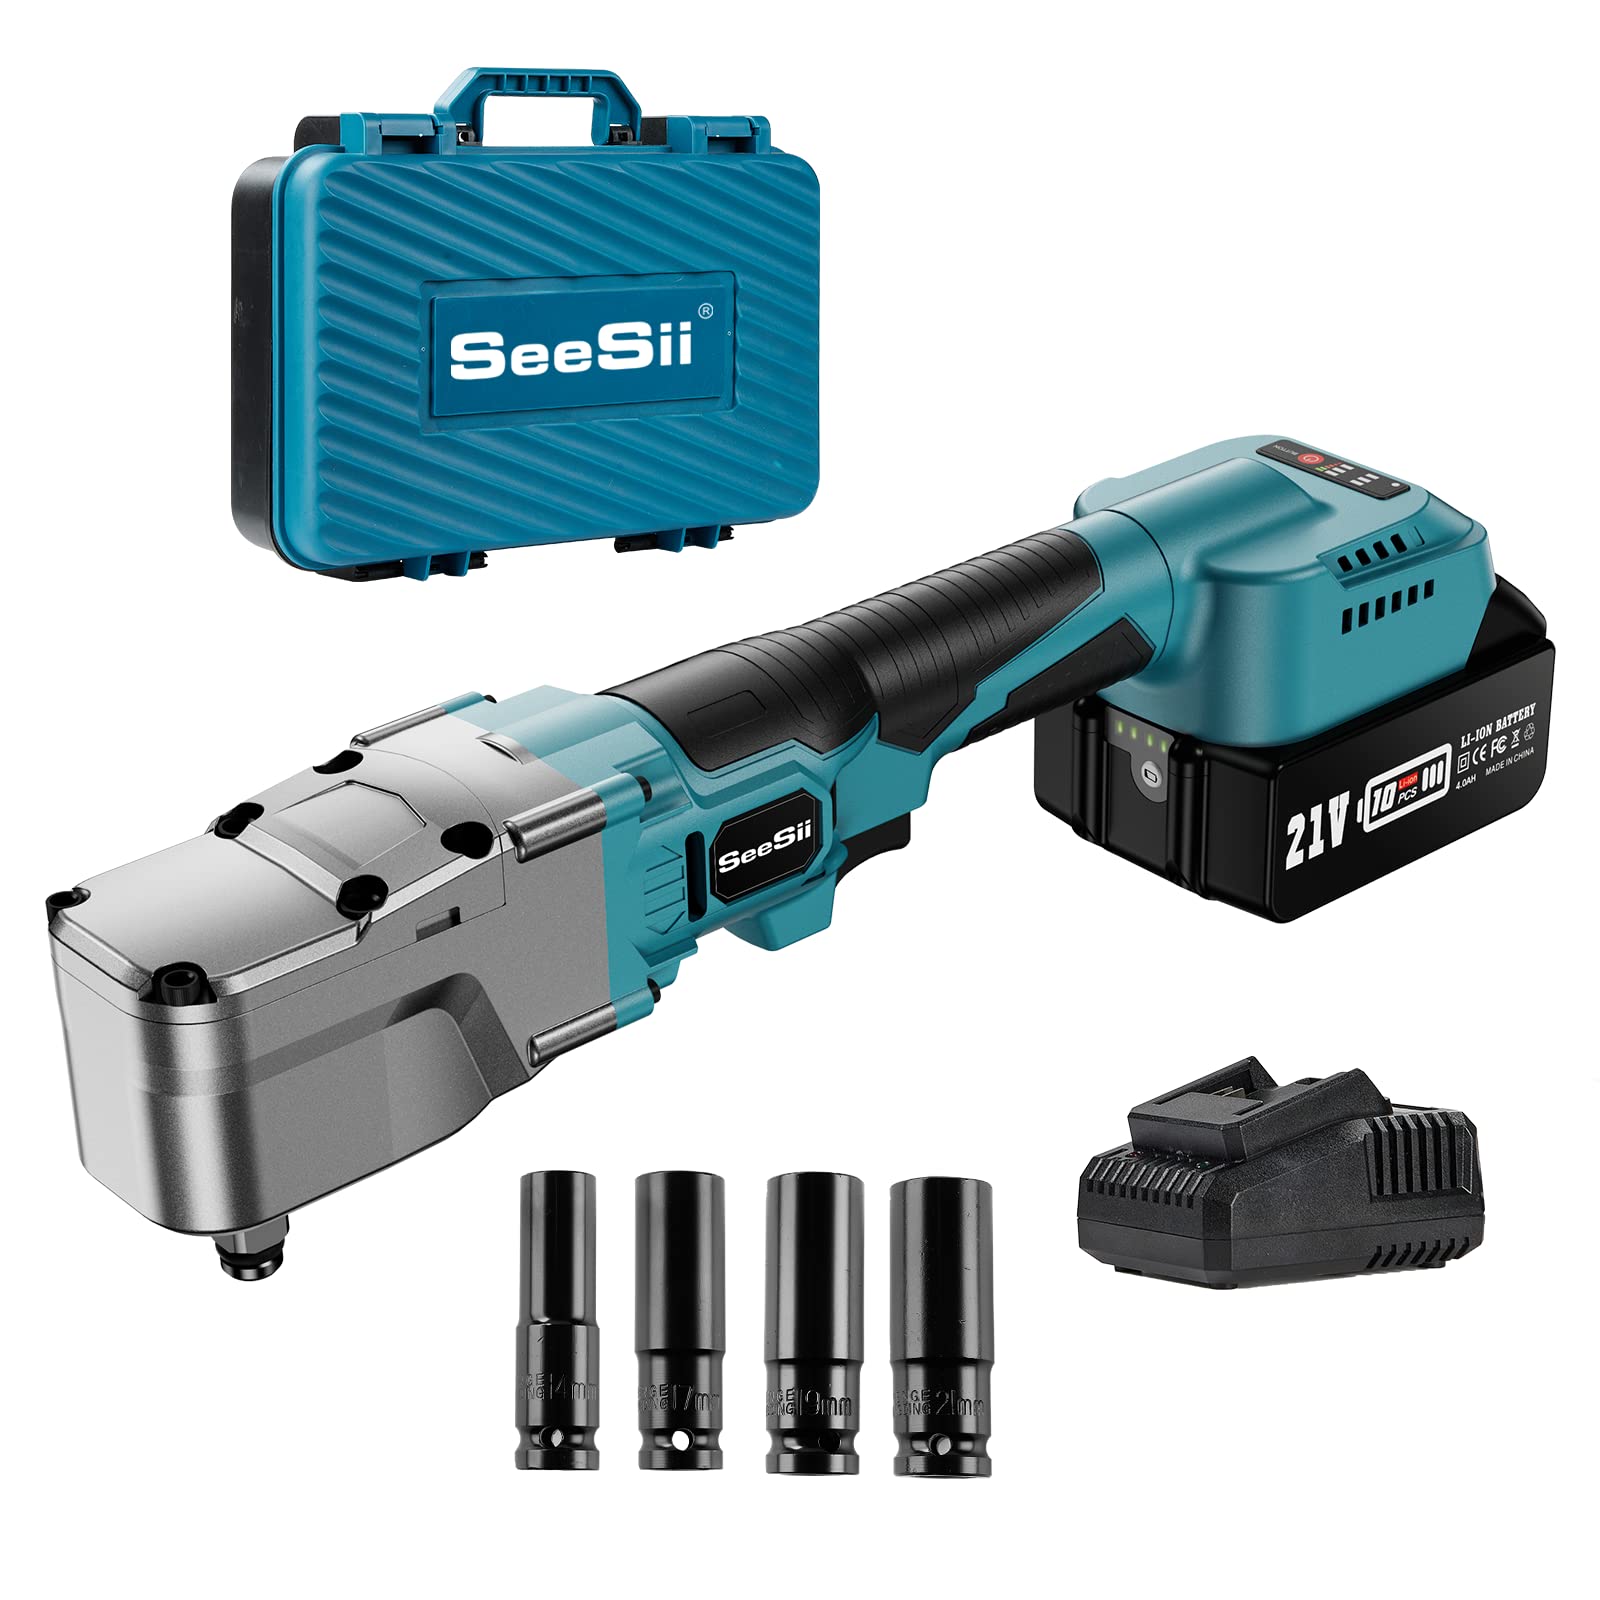 Seesii 12 Cordless Right Angle Impact Wrench220Ft-lbs300N.m Brushless Motor Impact Wrenchw4.0Ah Rechargable Battery